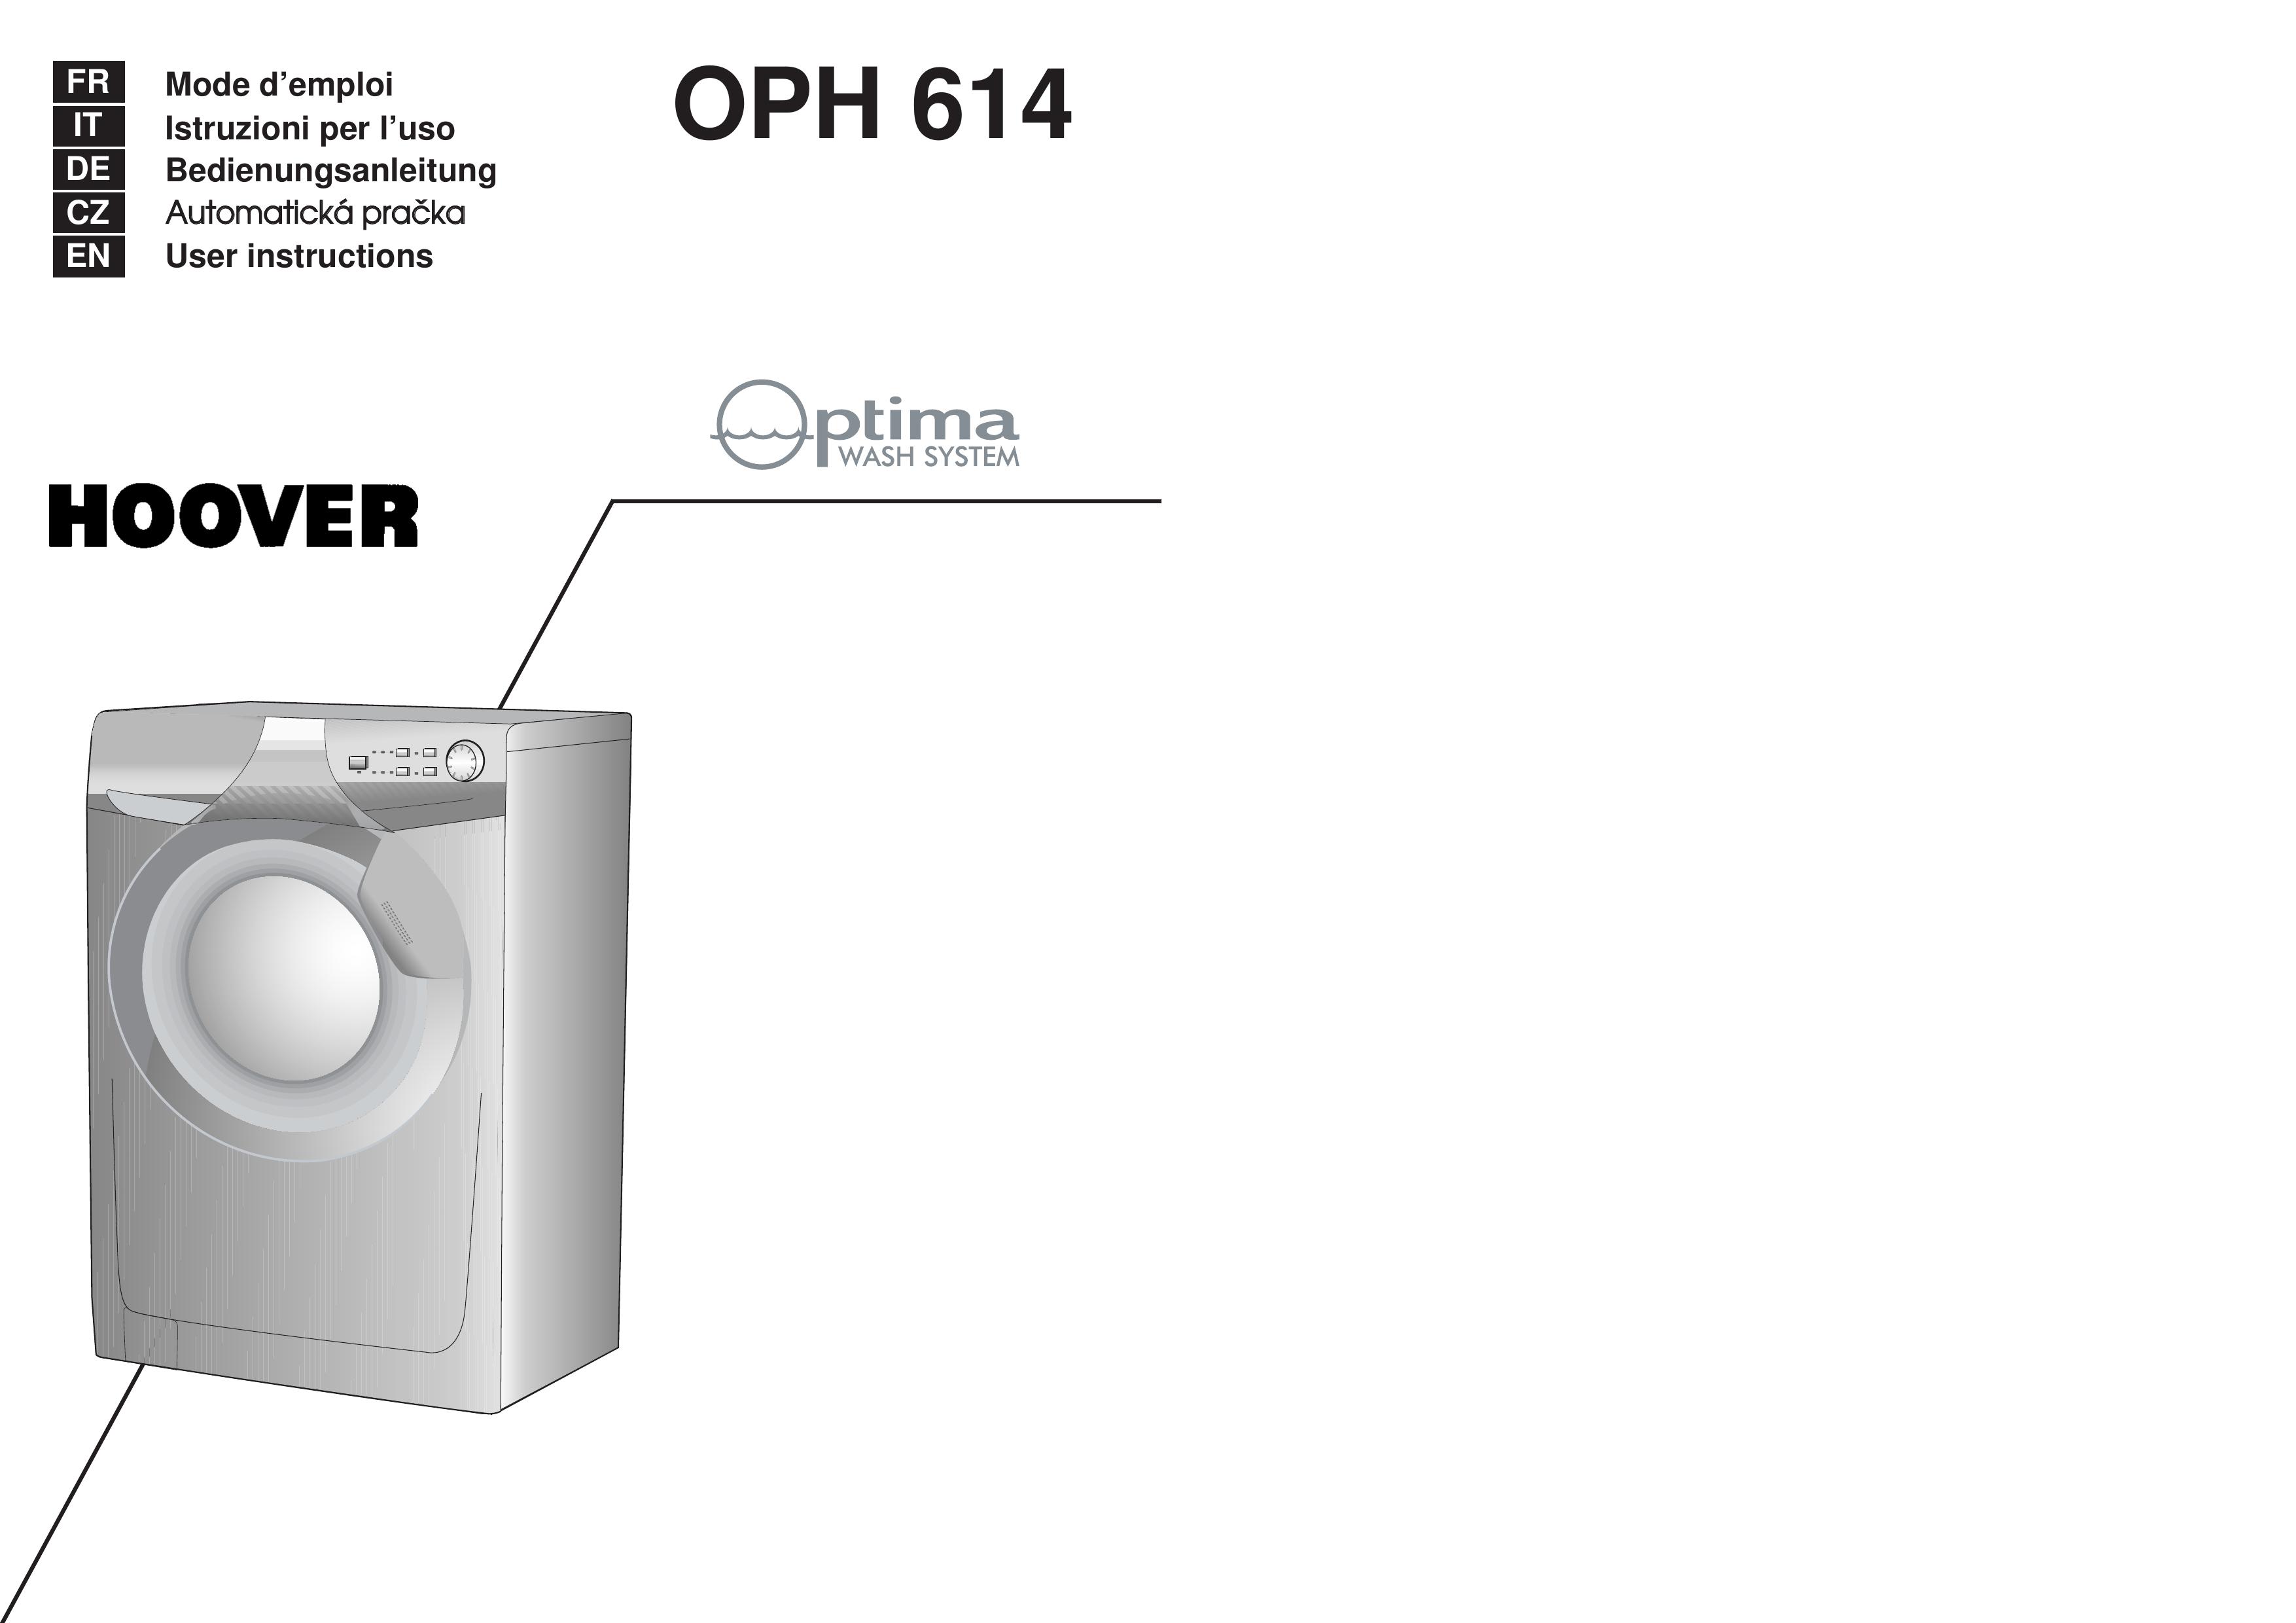 Hoover OPH 614 Washer User Manual